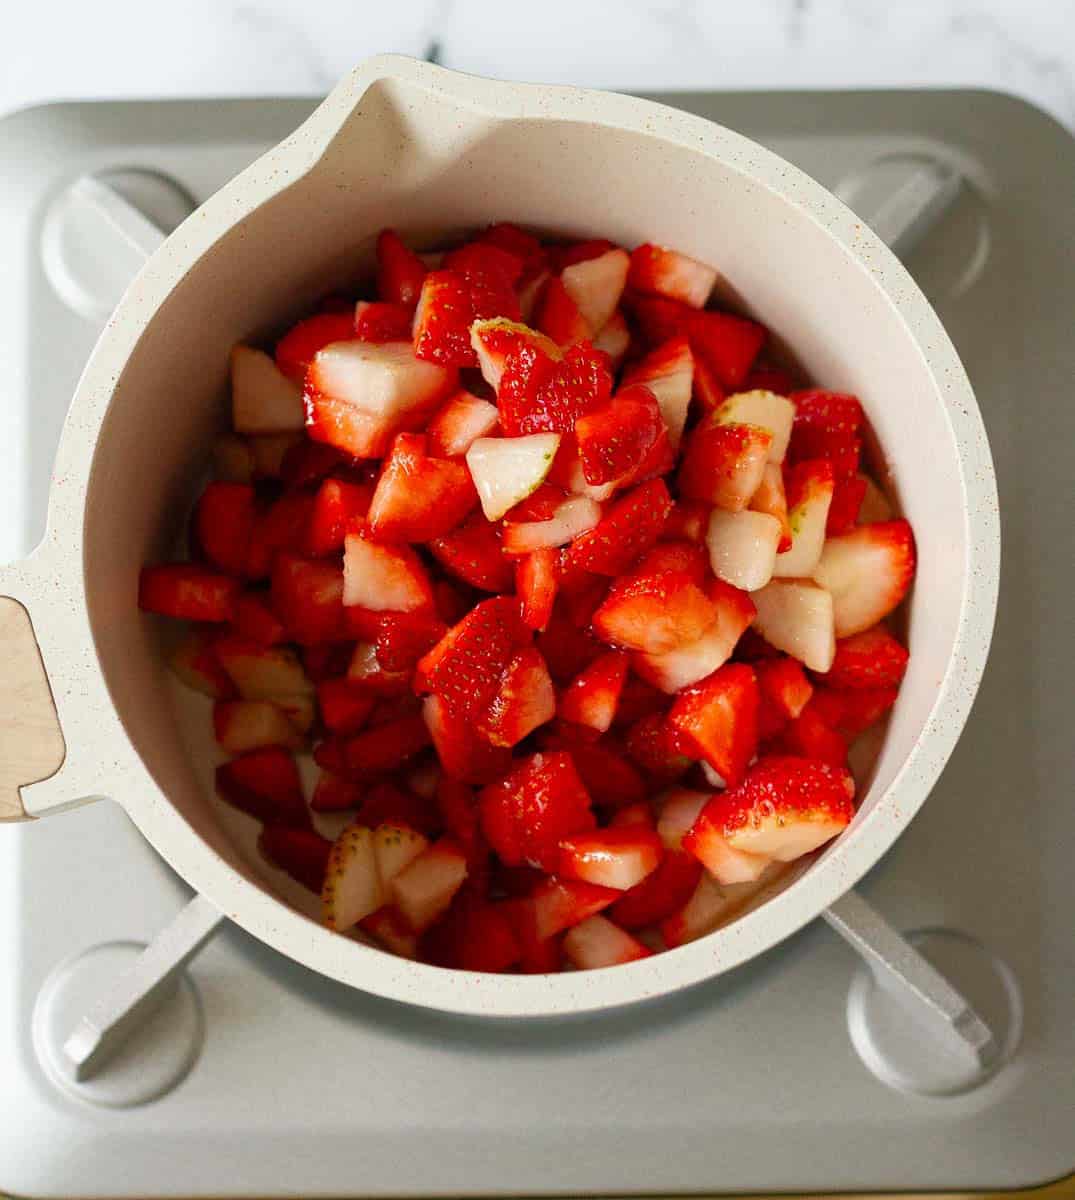 strawberry and sugar mixture in a saucepan